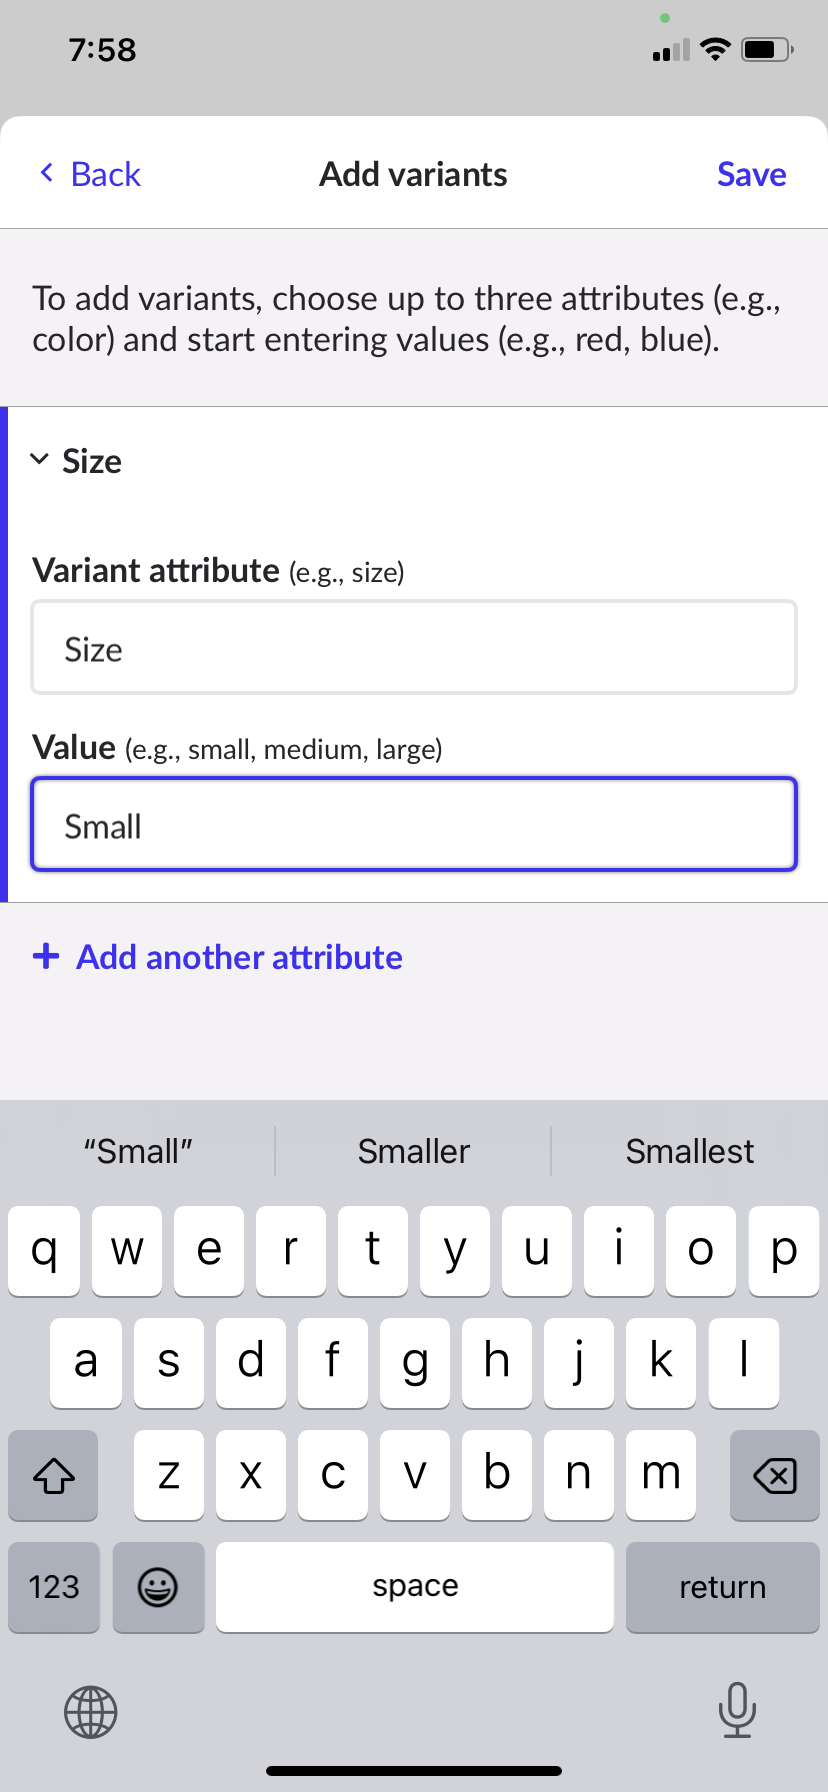 Adding variants page with fields to fill out attributes and values.